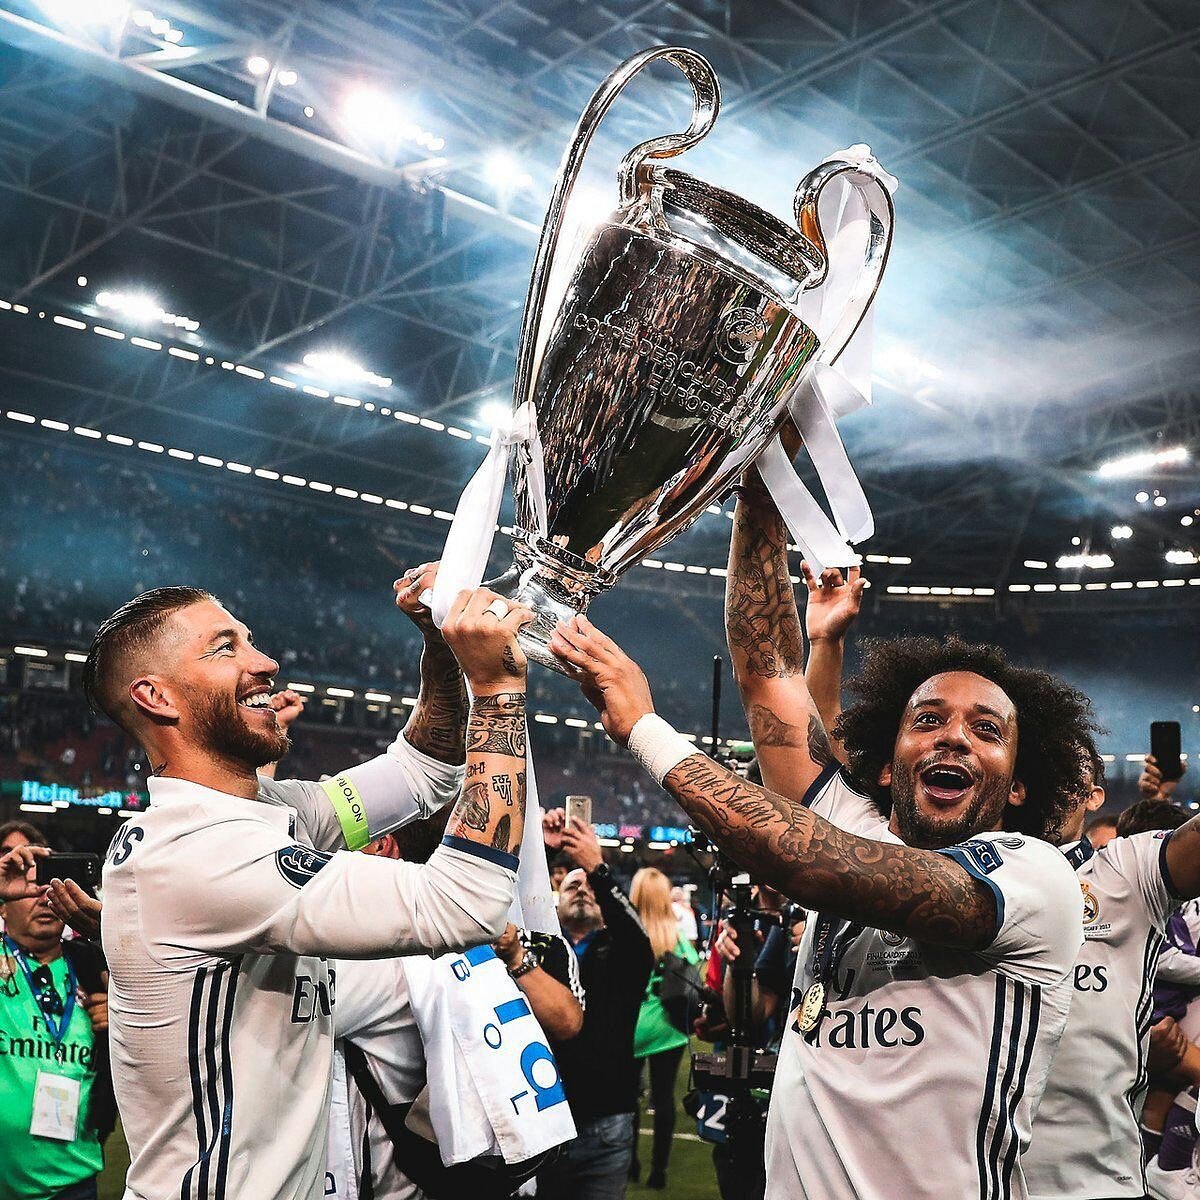 Congratulations my friends @sergioramos & @MarceloM12 
13th @ChampionsLeague titles
#magnusstrong https://t.co/ihWSp2V9za